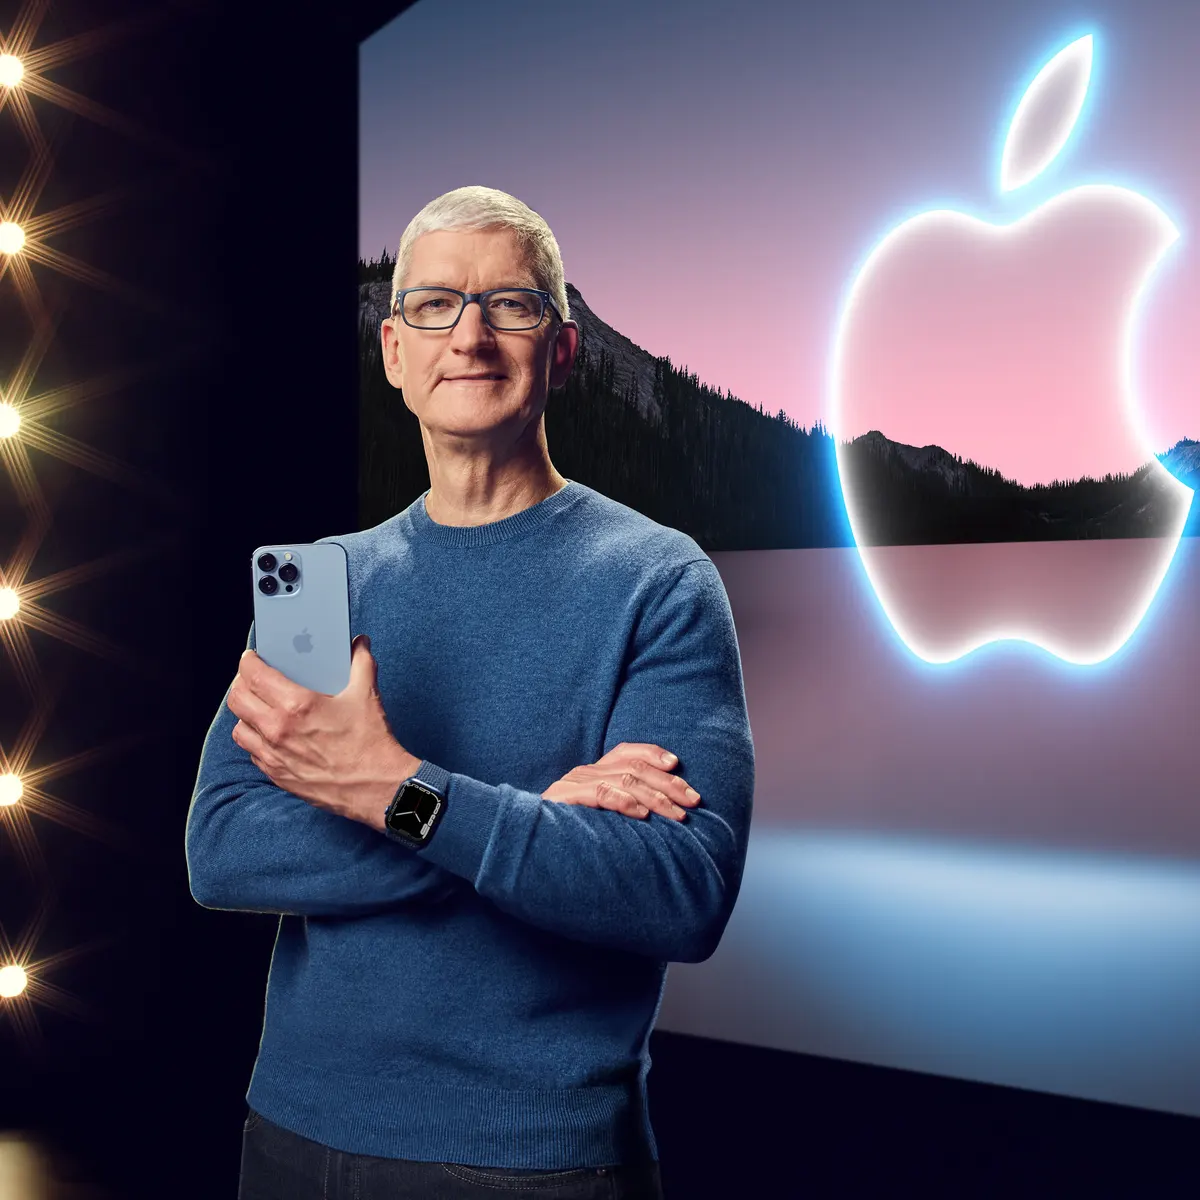 What was the controversy Tim Cook was embroiled in